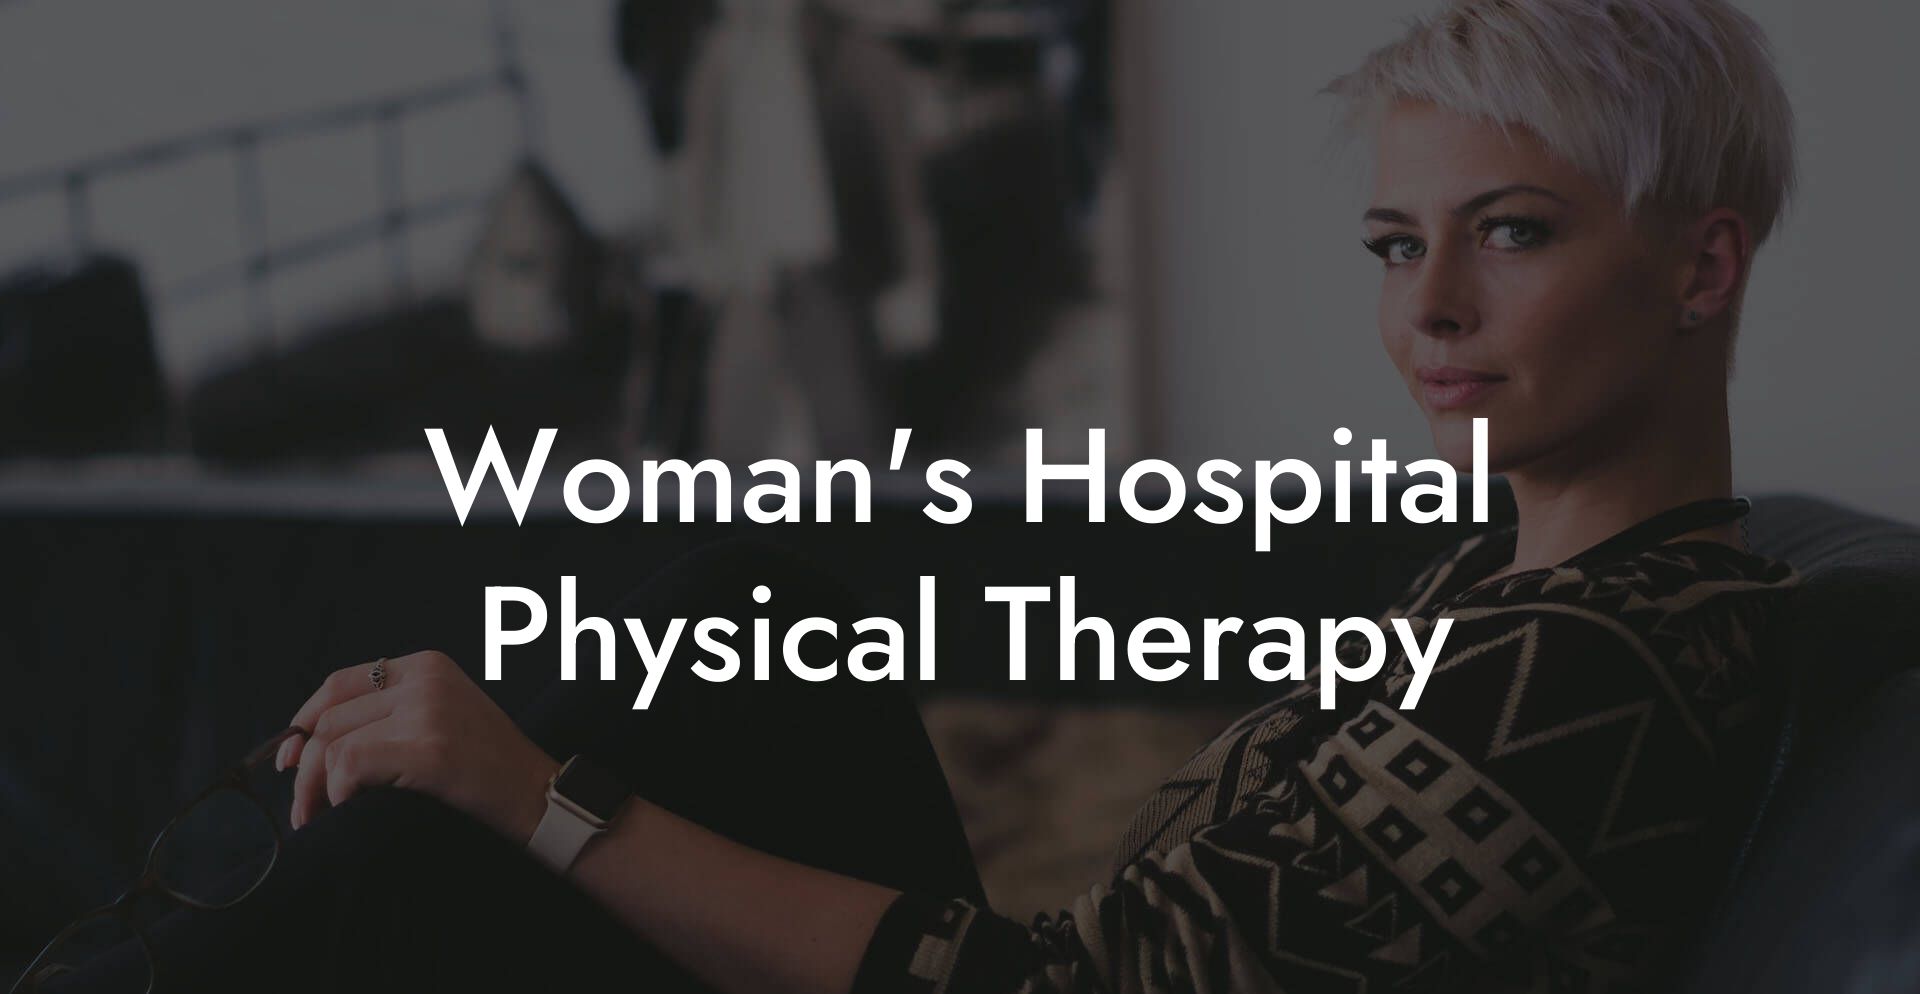 Woman's Hospital Physical Therapy